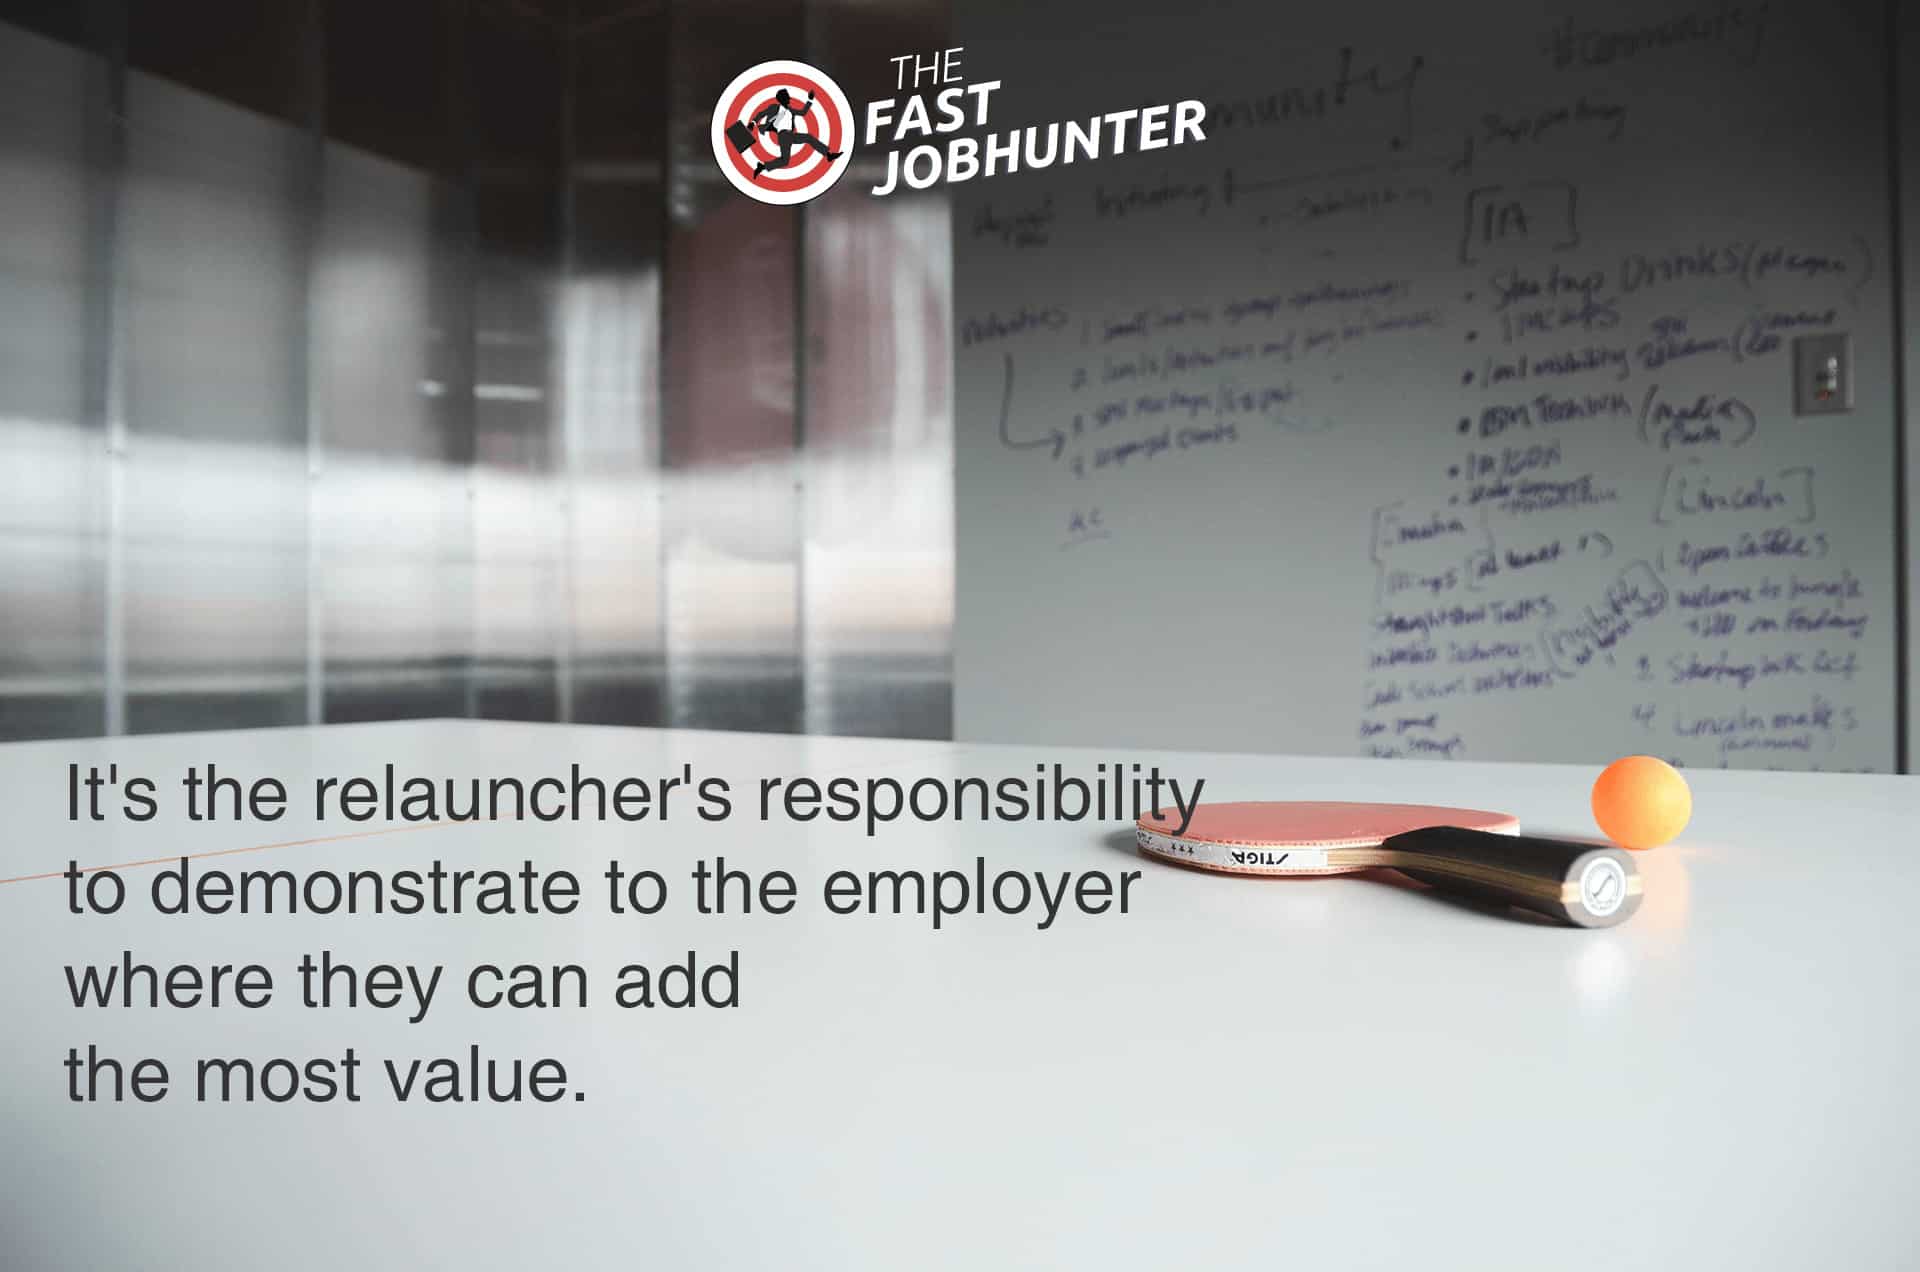 it's the relauncher's responsibility to demonstrate to the employer where they can add the most value